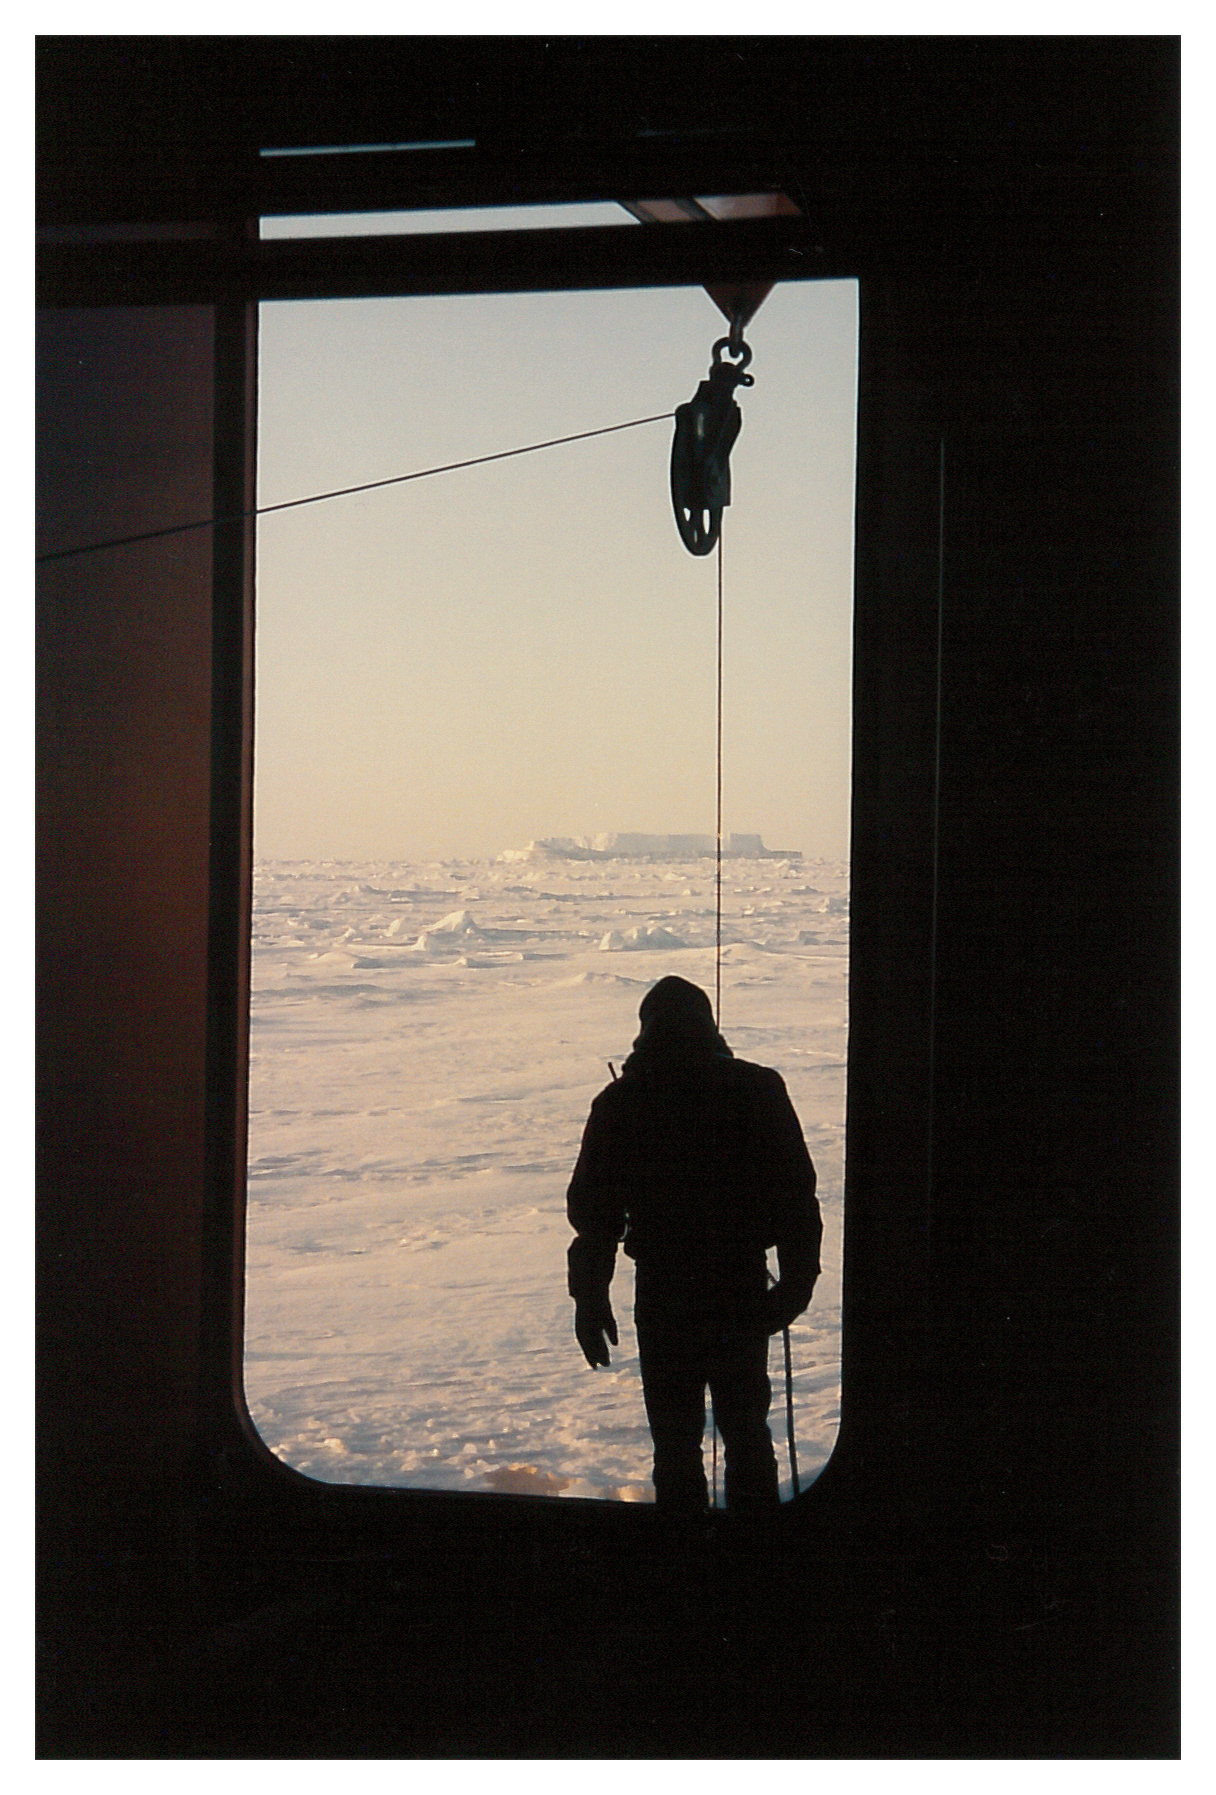 A person standing in an open port door of a ship.